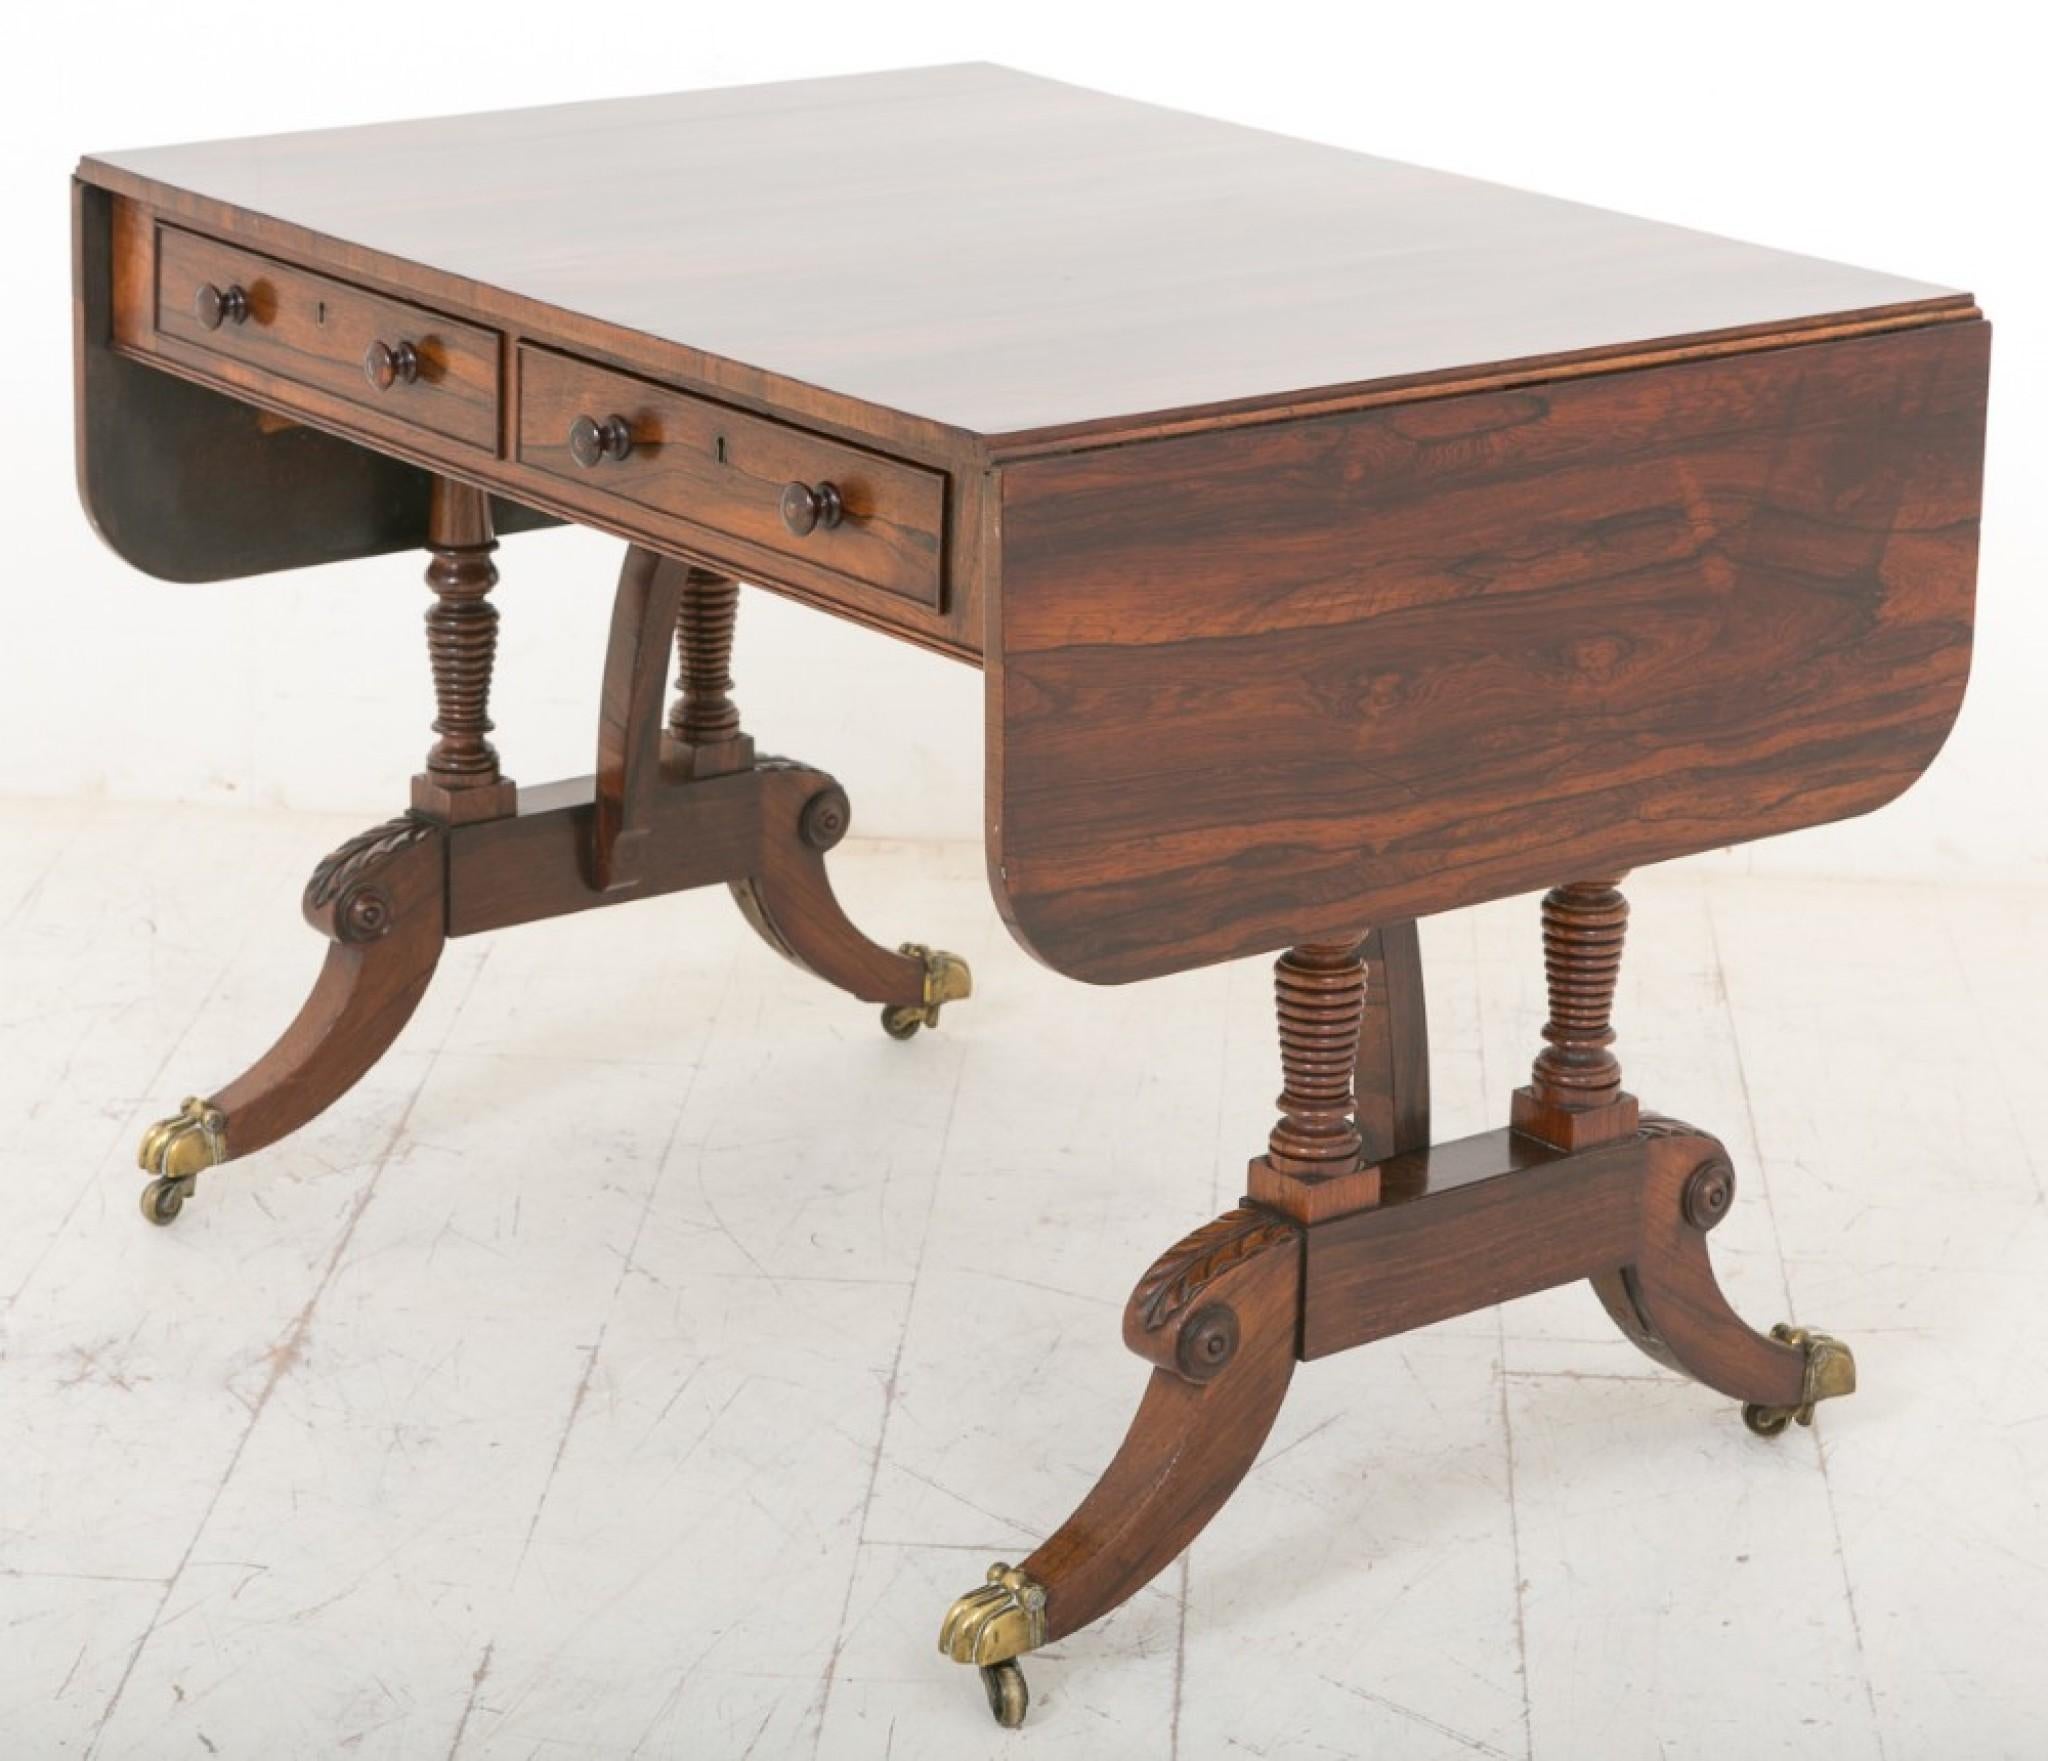 A superb Quality Rosewood sofa table.
19th Century
Standing on cast brass castors with a swept leg with carved knees and ring turned supports.
This piece features 2 x Mahogany lined working drawers with 2 x faux drawers to the reverse.
The top